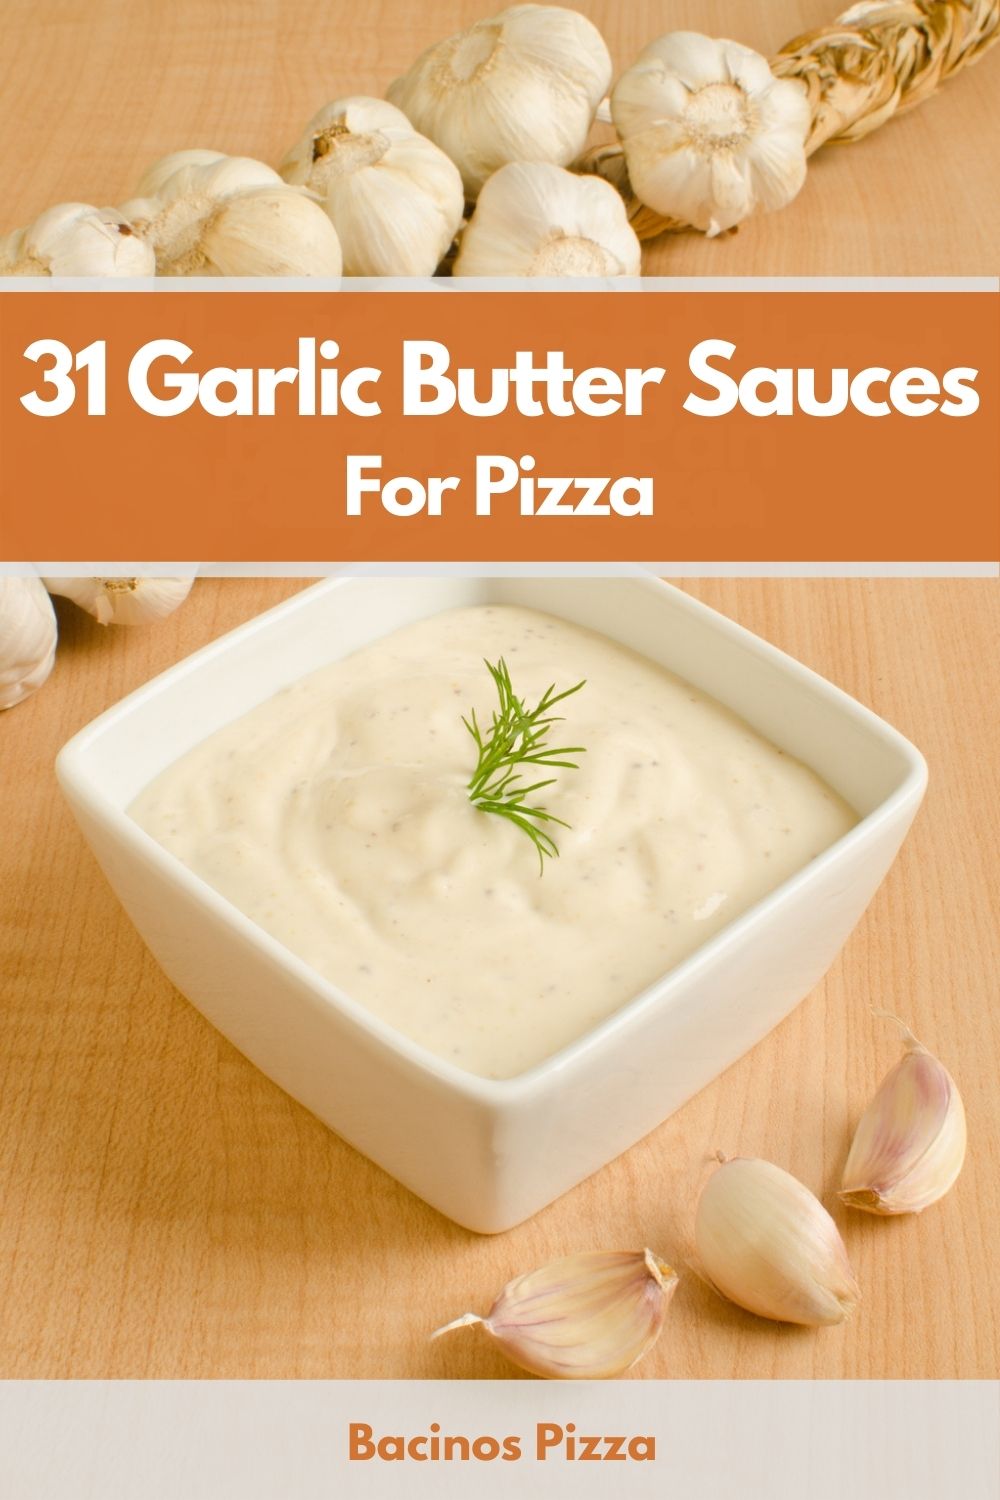 31 Garlic Butter Sauces For Pizza pin